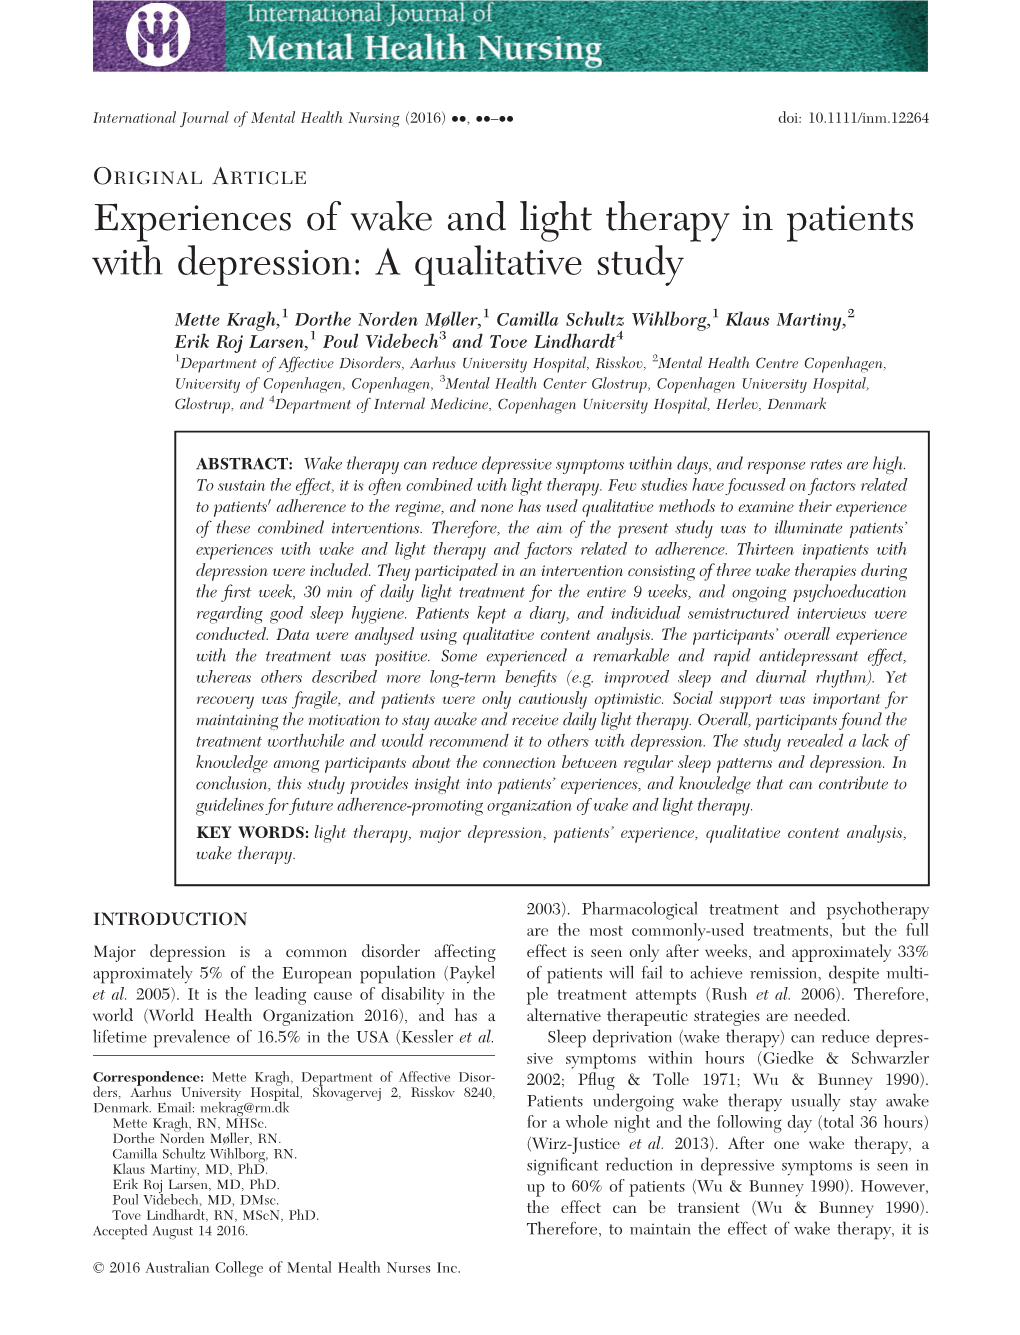 Experiences of Wake and Light Therapy in Patients with Depression: a Qualitative Study